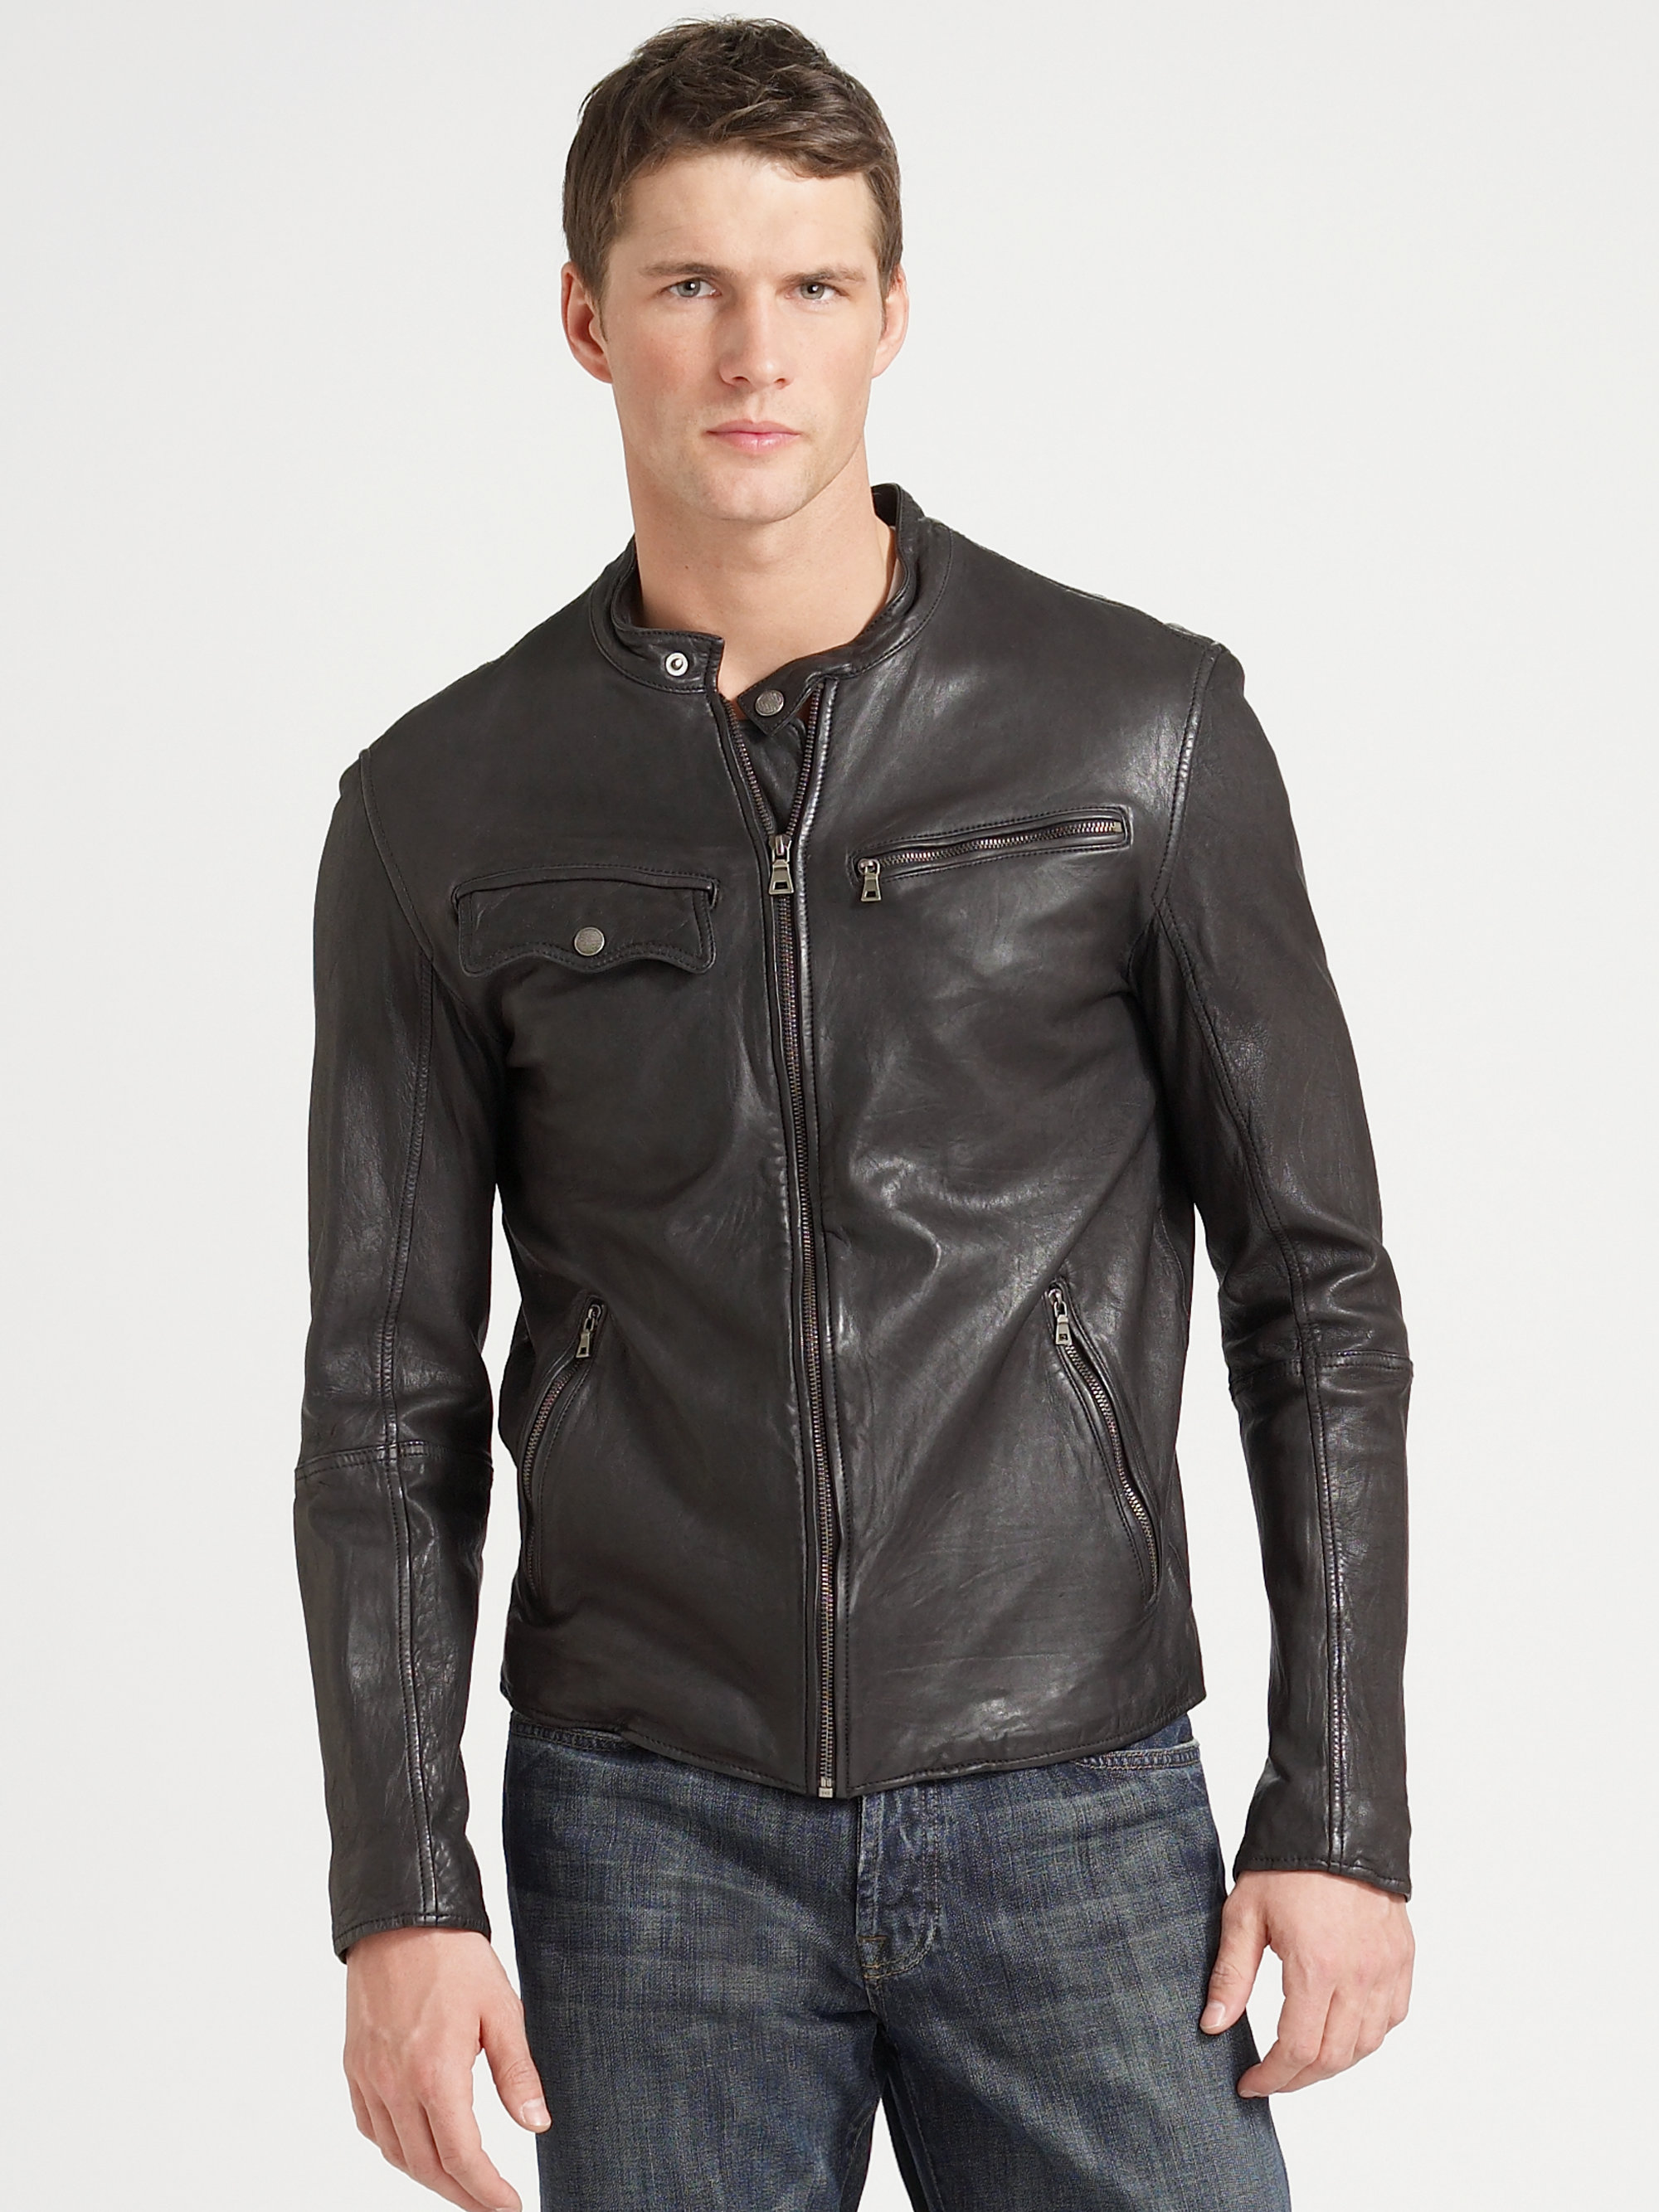 Cole Haan Washed Leather Motorcycle Jacket in Black for